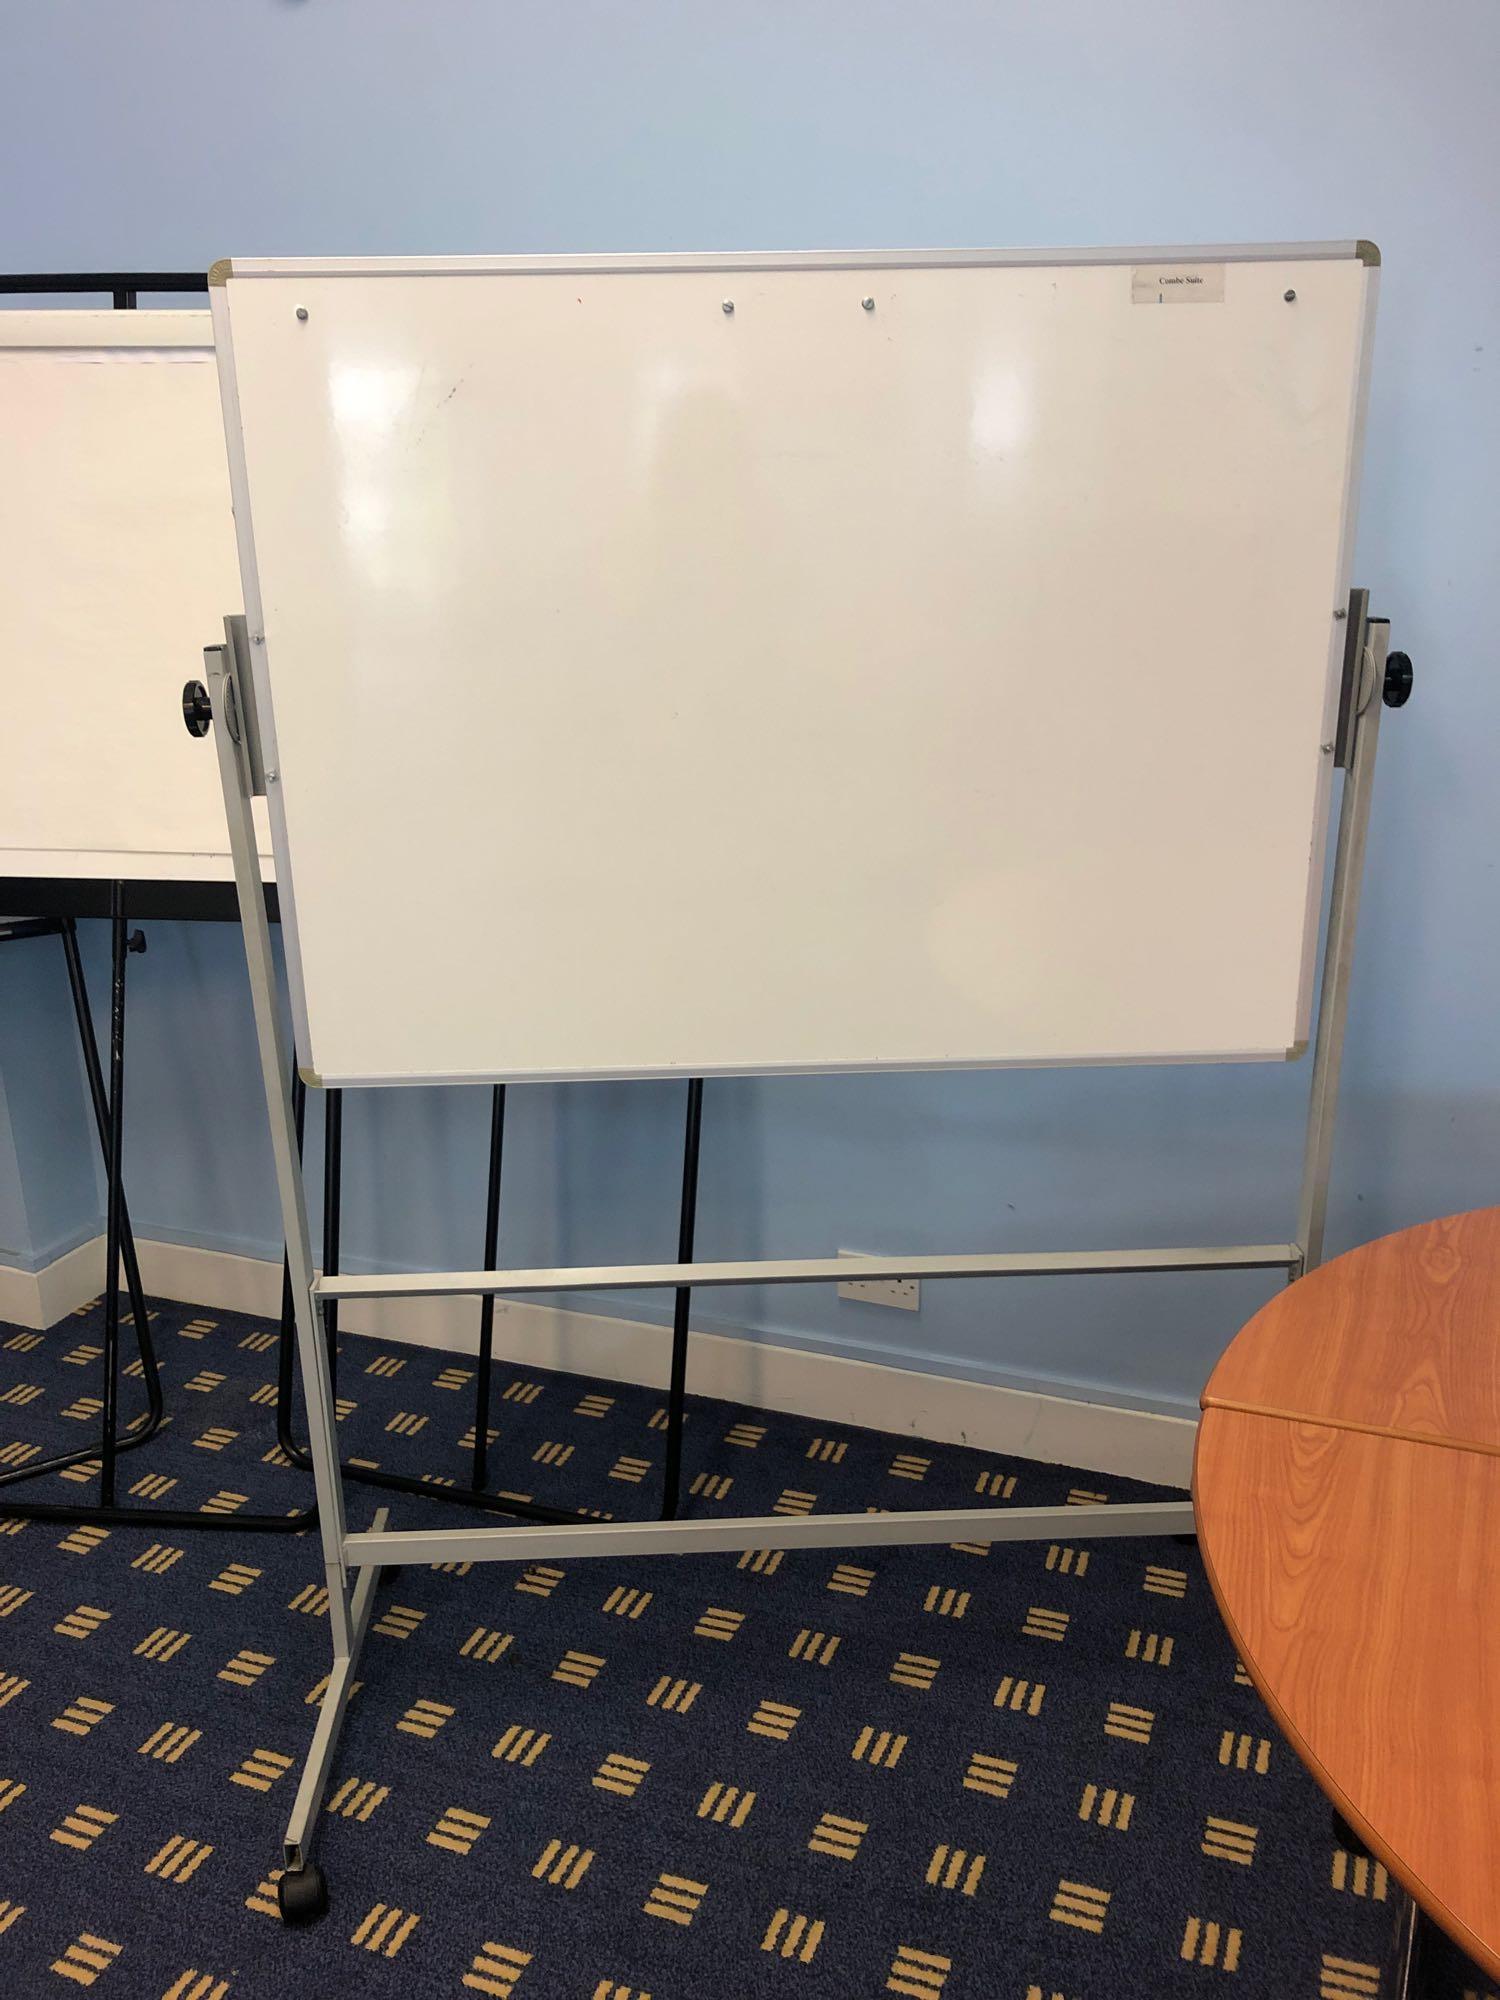 Pendax White Screen 1850 X 1850 Mm 3x Whiteboard/Flipchart Stands And A Mobile Whiteboard. - Image 3 of 3